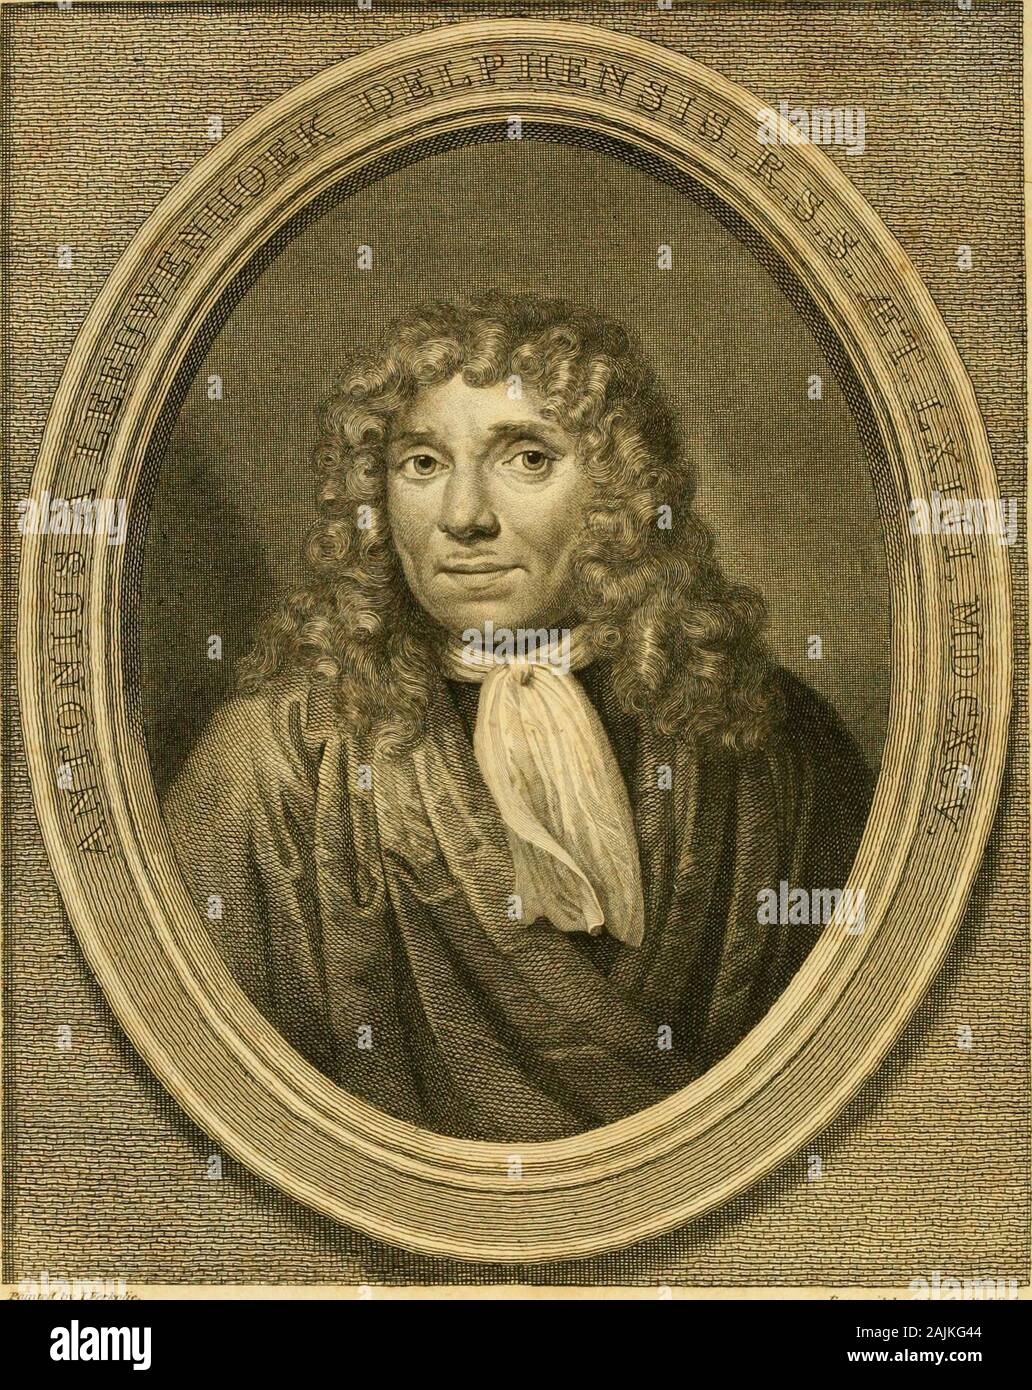 The select works of Antony van Leeuwenhoek : containing his microscopical discoveries in many of the works of nature . ^iB^^]^^^€l^f@J.Sl^«^^ --^^^ SiK^i^*5i!^s^^!=5i!^^=^i^^?^24^g^^ I. ?..,?,..?,./ /, .l.ii,,Si,u,.,.l!t..l. &gt; //I // /,?/////,// r// // . /fii /?, // ///1//1/ /r/// ///V i/l//ti/ • //, //ft / ///t t / / I ///It /////?/// ,t//.i t/i// ///^ /// i///f .t//,-i//,//ft /•//// 1//1 tt//// /&gt;//?! //trA Iti/t// ///(^t/i// :////,t//i xe//tt/t//- ft /t // I// //?r/,)t/i/// //t//w// f/l/Yt/ //t/f // , ;//// i//-////,&gt;//t// &lt;? // /^(^////t///////t//, ///t/lit /!//&lt;/./r If///t Stock Photo